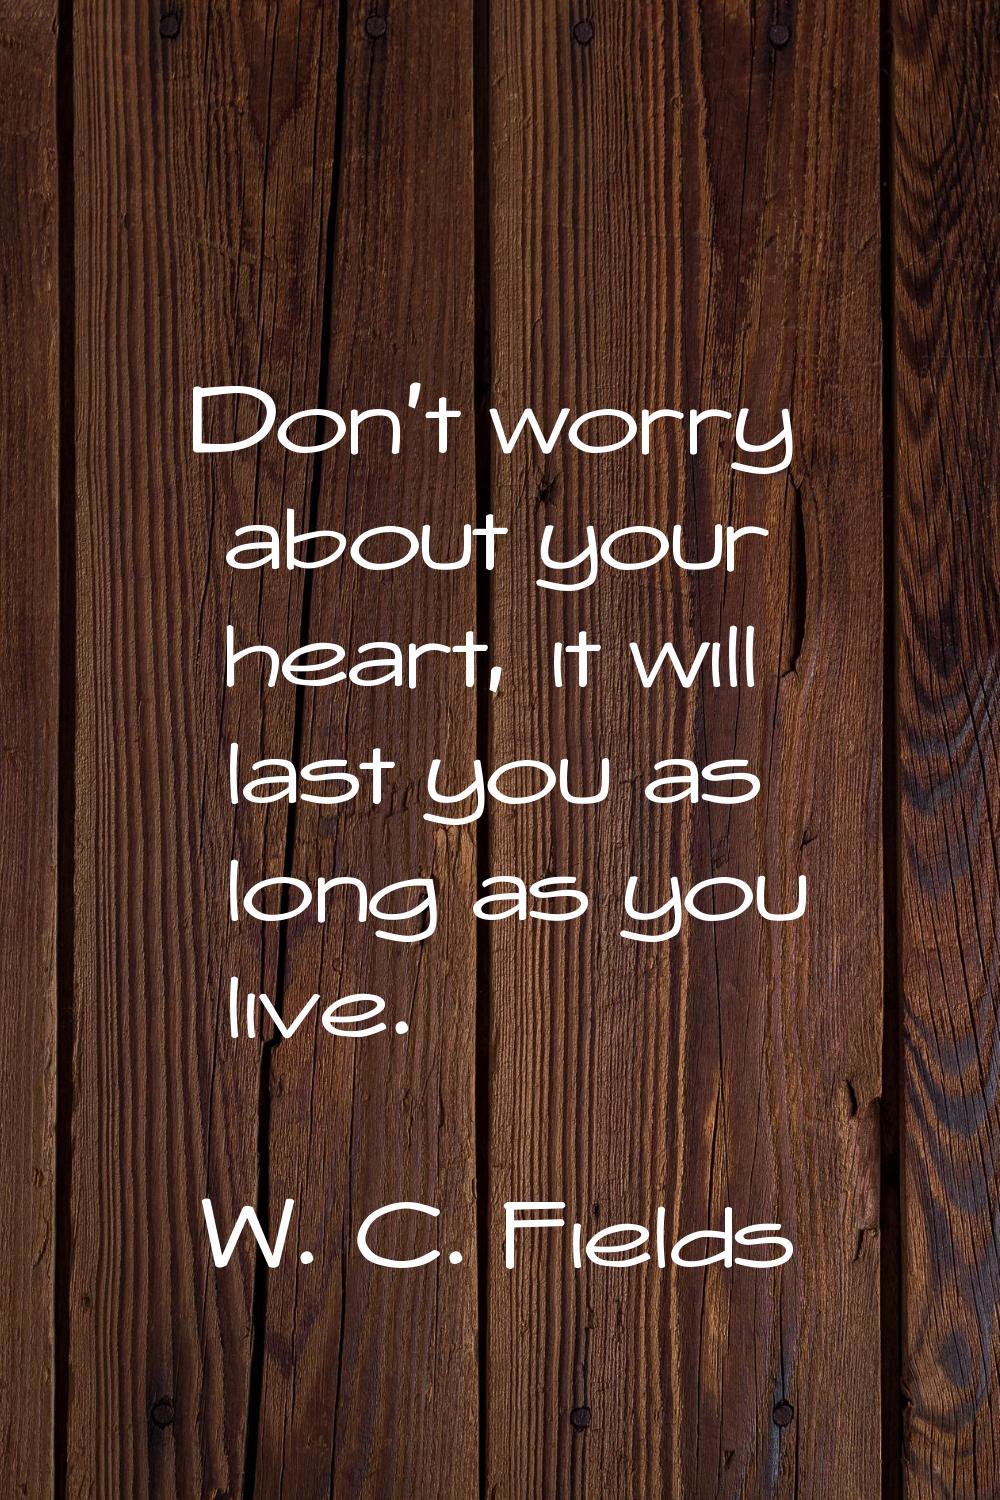 Don't worry about your heart, it will last you as long as you live.